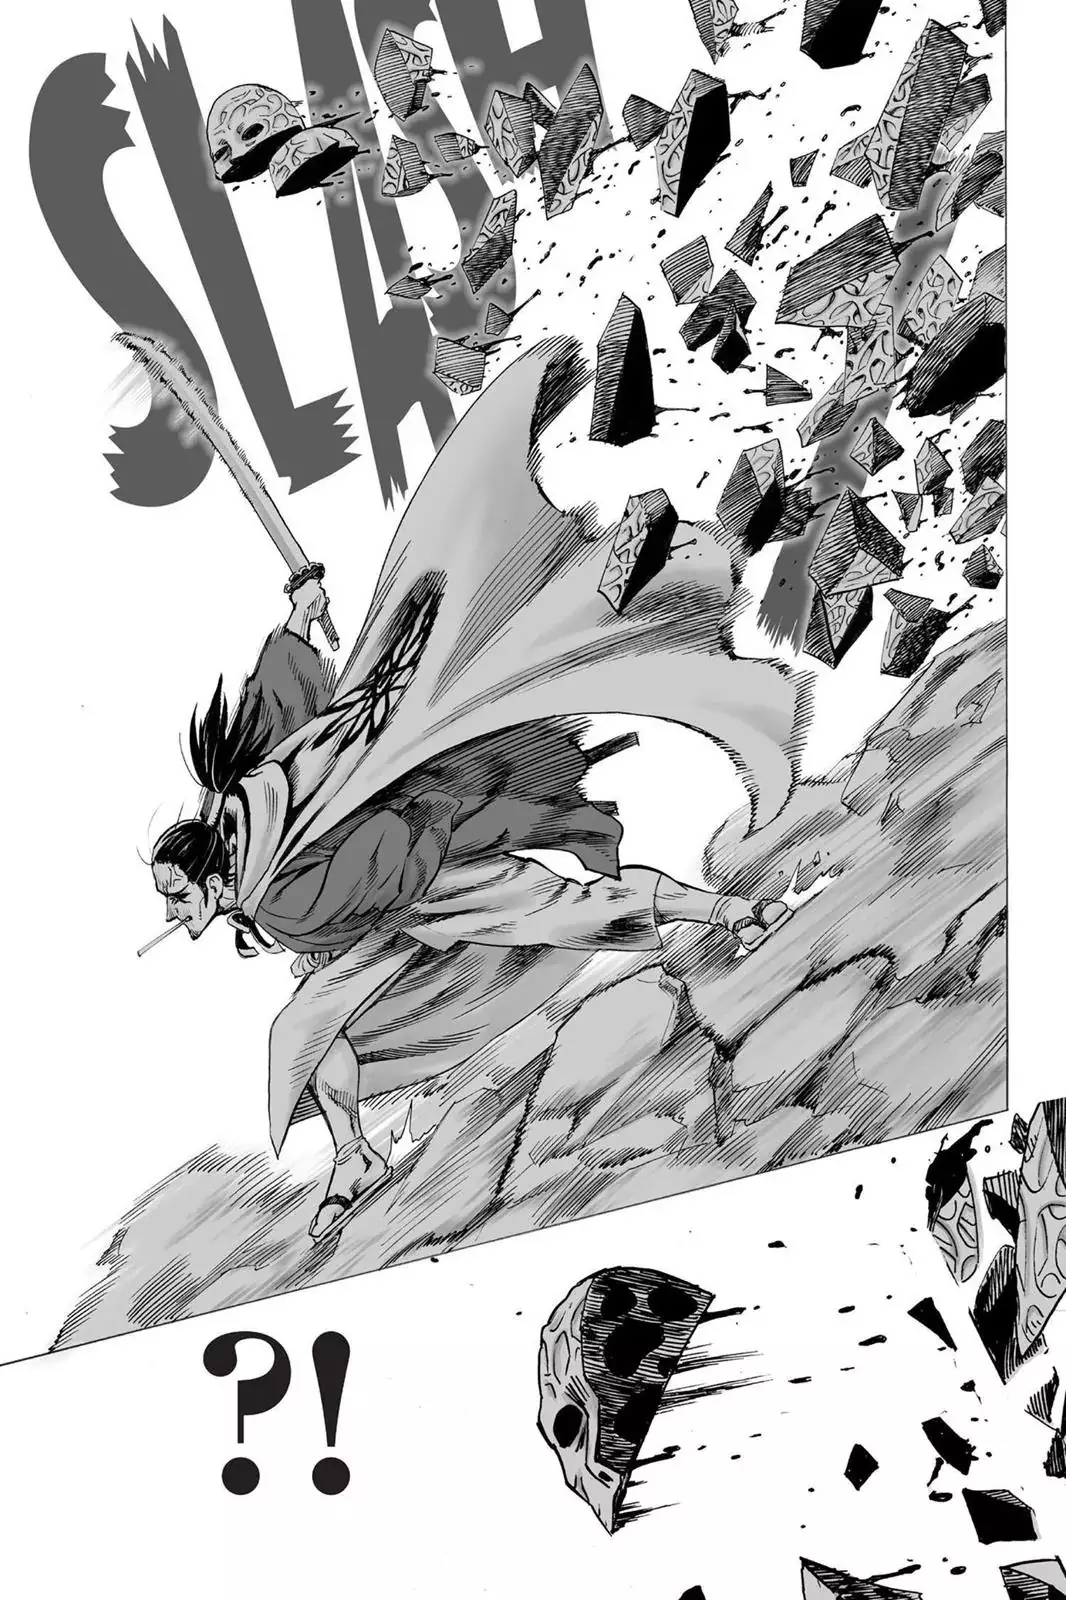 One Punch Man Chapter 32, READ One Punch Man Chapter 32 ONLINE, lost in the cloud genre,lost in the cloud gif,lost in the cloud girl,lost in the cloud goods,lost in the cloud goodreads,lost in the cloud,lost ark cloud gaming,lost odyssey cloud gaming,lost in the cloud fanart,lost in the cloud fanfic,lost in the cloud fandom,lost in the cloud first kiss,lost in the cloud font,lost in the cloud ending,lost in the cloud episode 97,lost in the cloud edit,lost in the cloud explained,lost in the cloud dog,lost in the cloud discord server,lost in the cloud desktop wallpaper,lost in the cloud drawing,can't find my cloud on network,lost in the cloud characters,lost in the cloud chapter 93 release date,lost in the cloud birthday,lost in the cloud birthday art,lost in the cloud background,lost in the cloud banner,lost in the clouds meaning,what is the black cloud in lost,lost in the cloud ao3,lost in the cloud anime,lost in the cloud art,lost in the cloud author twitter,lost in the cloud author instagram,lost in the cloud artist,lost in the cloud acrylic stand,lost in the cloud artist twitter,lost in the cloud art style,lost in the cloud analysis